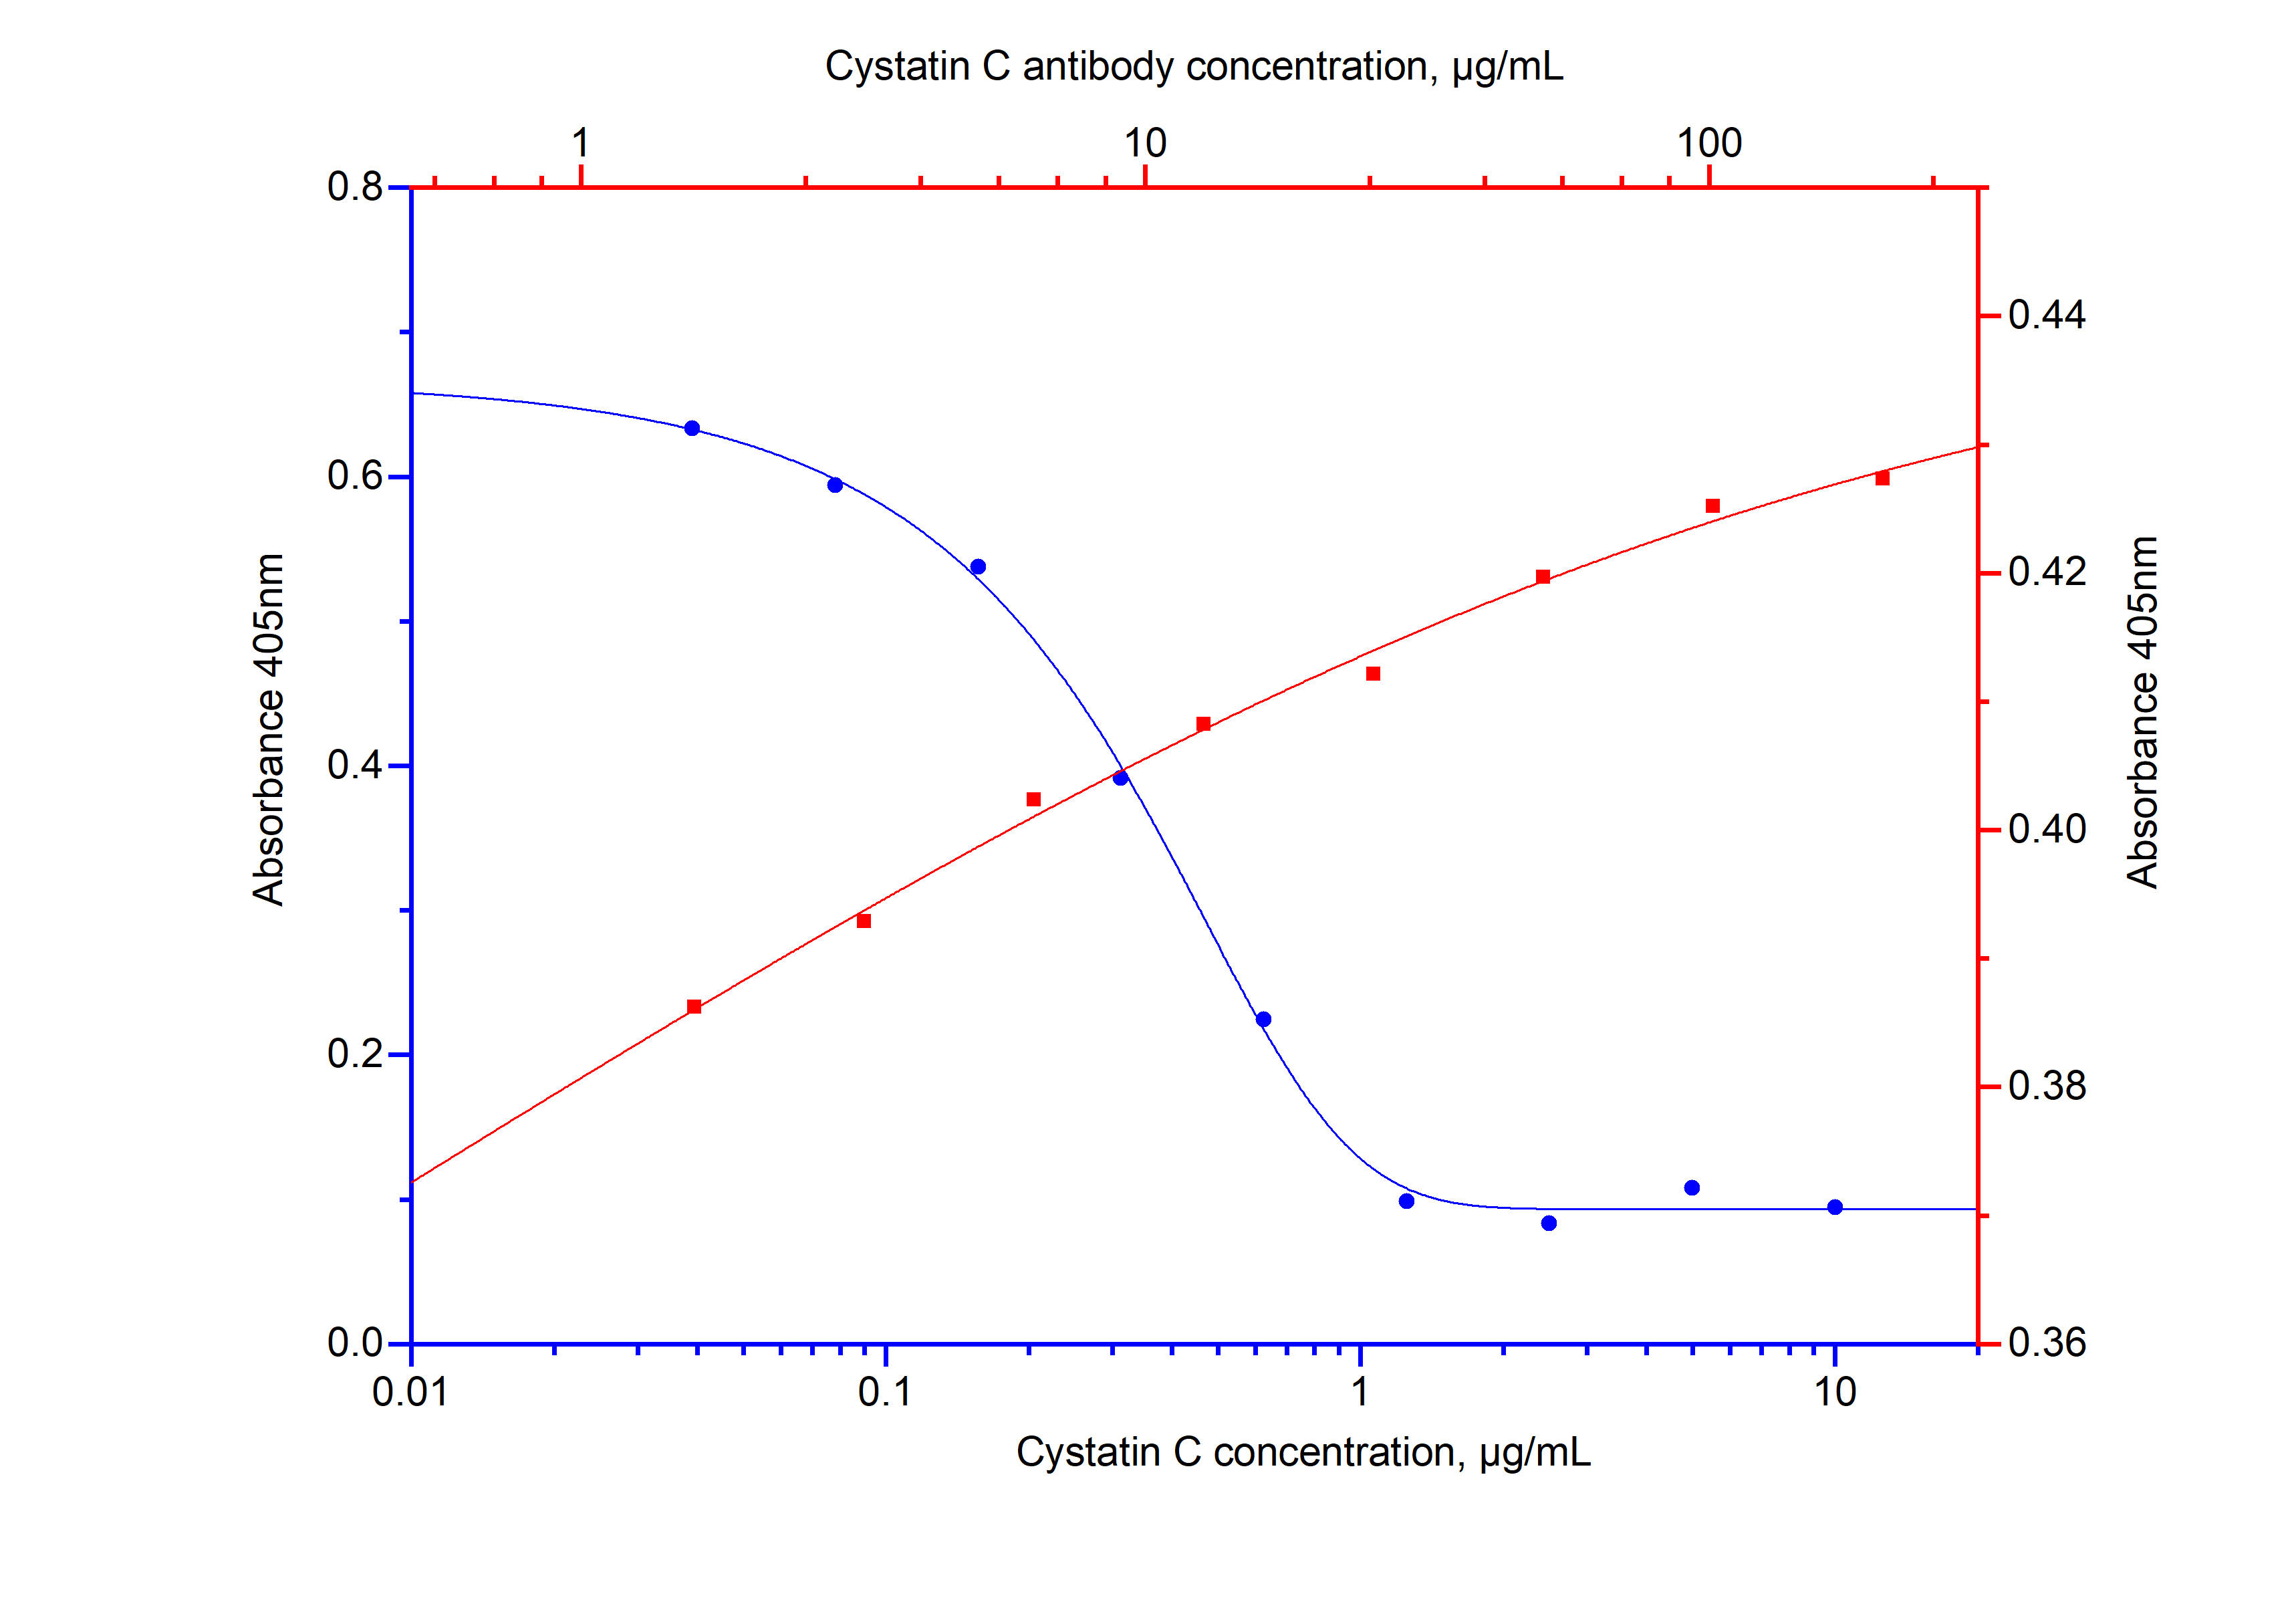 Recombinant human Cystatin C (Cat.NO. HZ-1211) inhibits Papain protease (5 µg/mL) activity (by colorimetric assay using L-BAPA as substrate) in a dose-dependent manner (blue curve, refer to bottom X-left Y). The activity of human Cystatin C (100 µg/mL HZ-1211) is neutralized by mouse anti-human Cystatin C monoclonal antibody 69017-1-Ig at serial dose (red curve, refer to top X-right Y). The ND50 is around 0.5mg/mL.